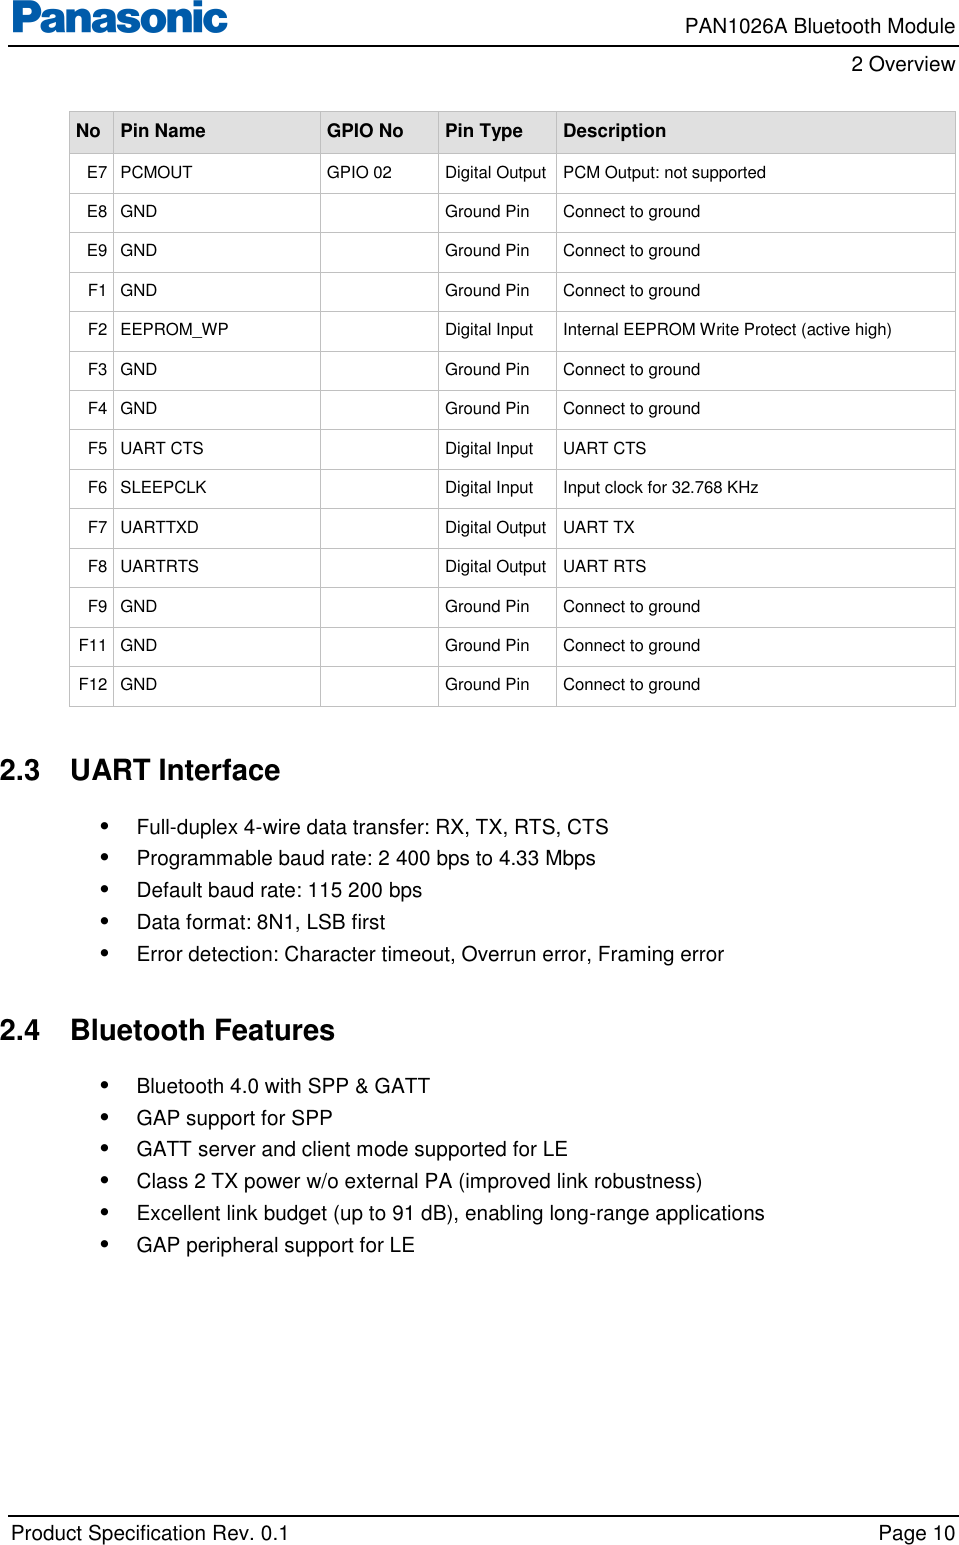     PAN1026A Bluetooth Module         2 Overview    Product Specification Rev. 0.1    Page 10  No Pin Name GPIO No Pin Type Description E7 PCMOUT GPIO 02 Digital Output PCM Output: not supported E8 GND  Ground Pin Connect to ground E9 GND  Ground Pin Connect to ground F1 GND  Ground Pin Connect to ground F2 EEPROM_WP  Digital Input Internal EEPROM Write Protect (active high) F3 GND  Ground Pin Connect to ground F4 GND  Ground Pin Connect to ground F5 UART CTS  Digital Input UART CTS F6 SLEEPCLK  Digital Input Input clock for 32.768 KHz F7 UARTTXD  Digital Output UART TX  F8 UARTRTS  Digital Output UART RTS F9 GND  Ground Pin Connect to ground F11 GND  Ground Pin Connect to ground F12 GND  Ground Pin Connect to ground  2.3  UART Interface • Full-duplex 4-wire data transfer: RX, TX, RTS, CTS • Programmable baud rate: 2 400 bps to 4.33 Mbps  • Default baud rate: 115 200 bps • Data format: 8N1, LSB first • Error detection: Character timeout, Overrun error, Framing error  2.4  Bluetooth Features • Bluetooth 4.0 with SPP &amp; GATT • GAP support for SPP  • GATT server and client mode supported for LE • Class 2 TX power w/o external PA (improved link robustness) • Excellent link budget (up to 91 dB), enabling long-range applications • GAP peripheral support for LE  